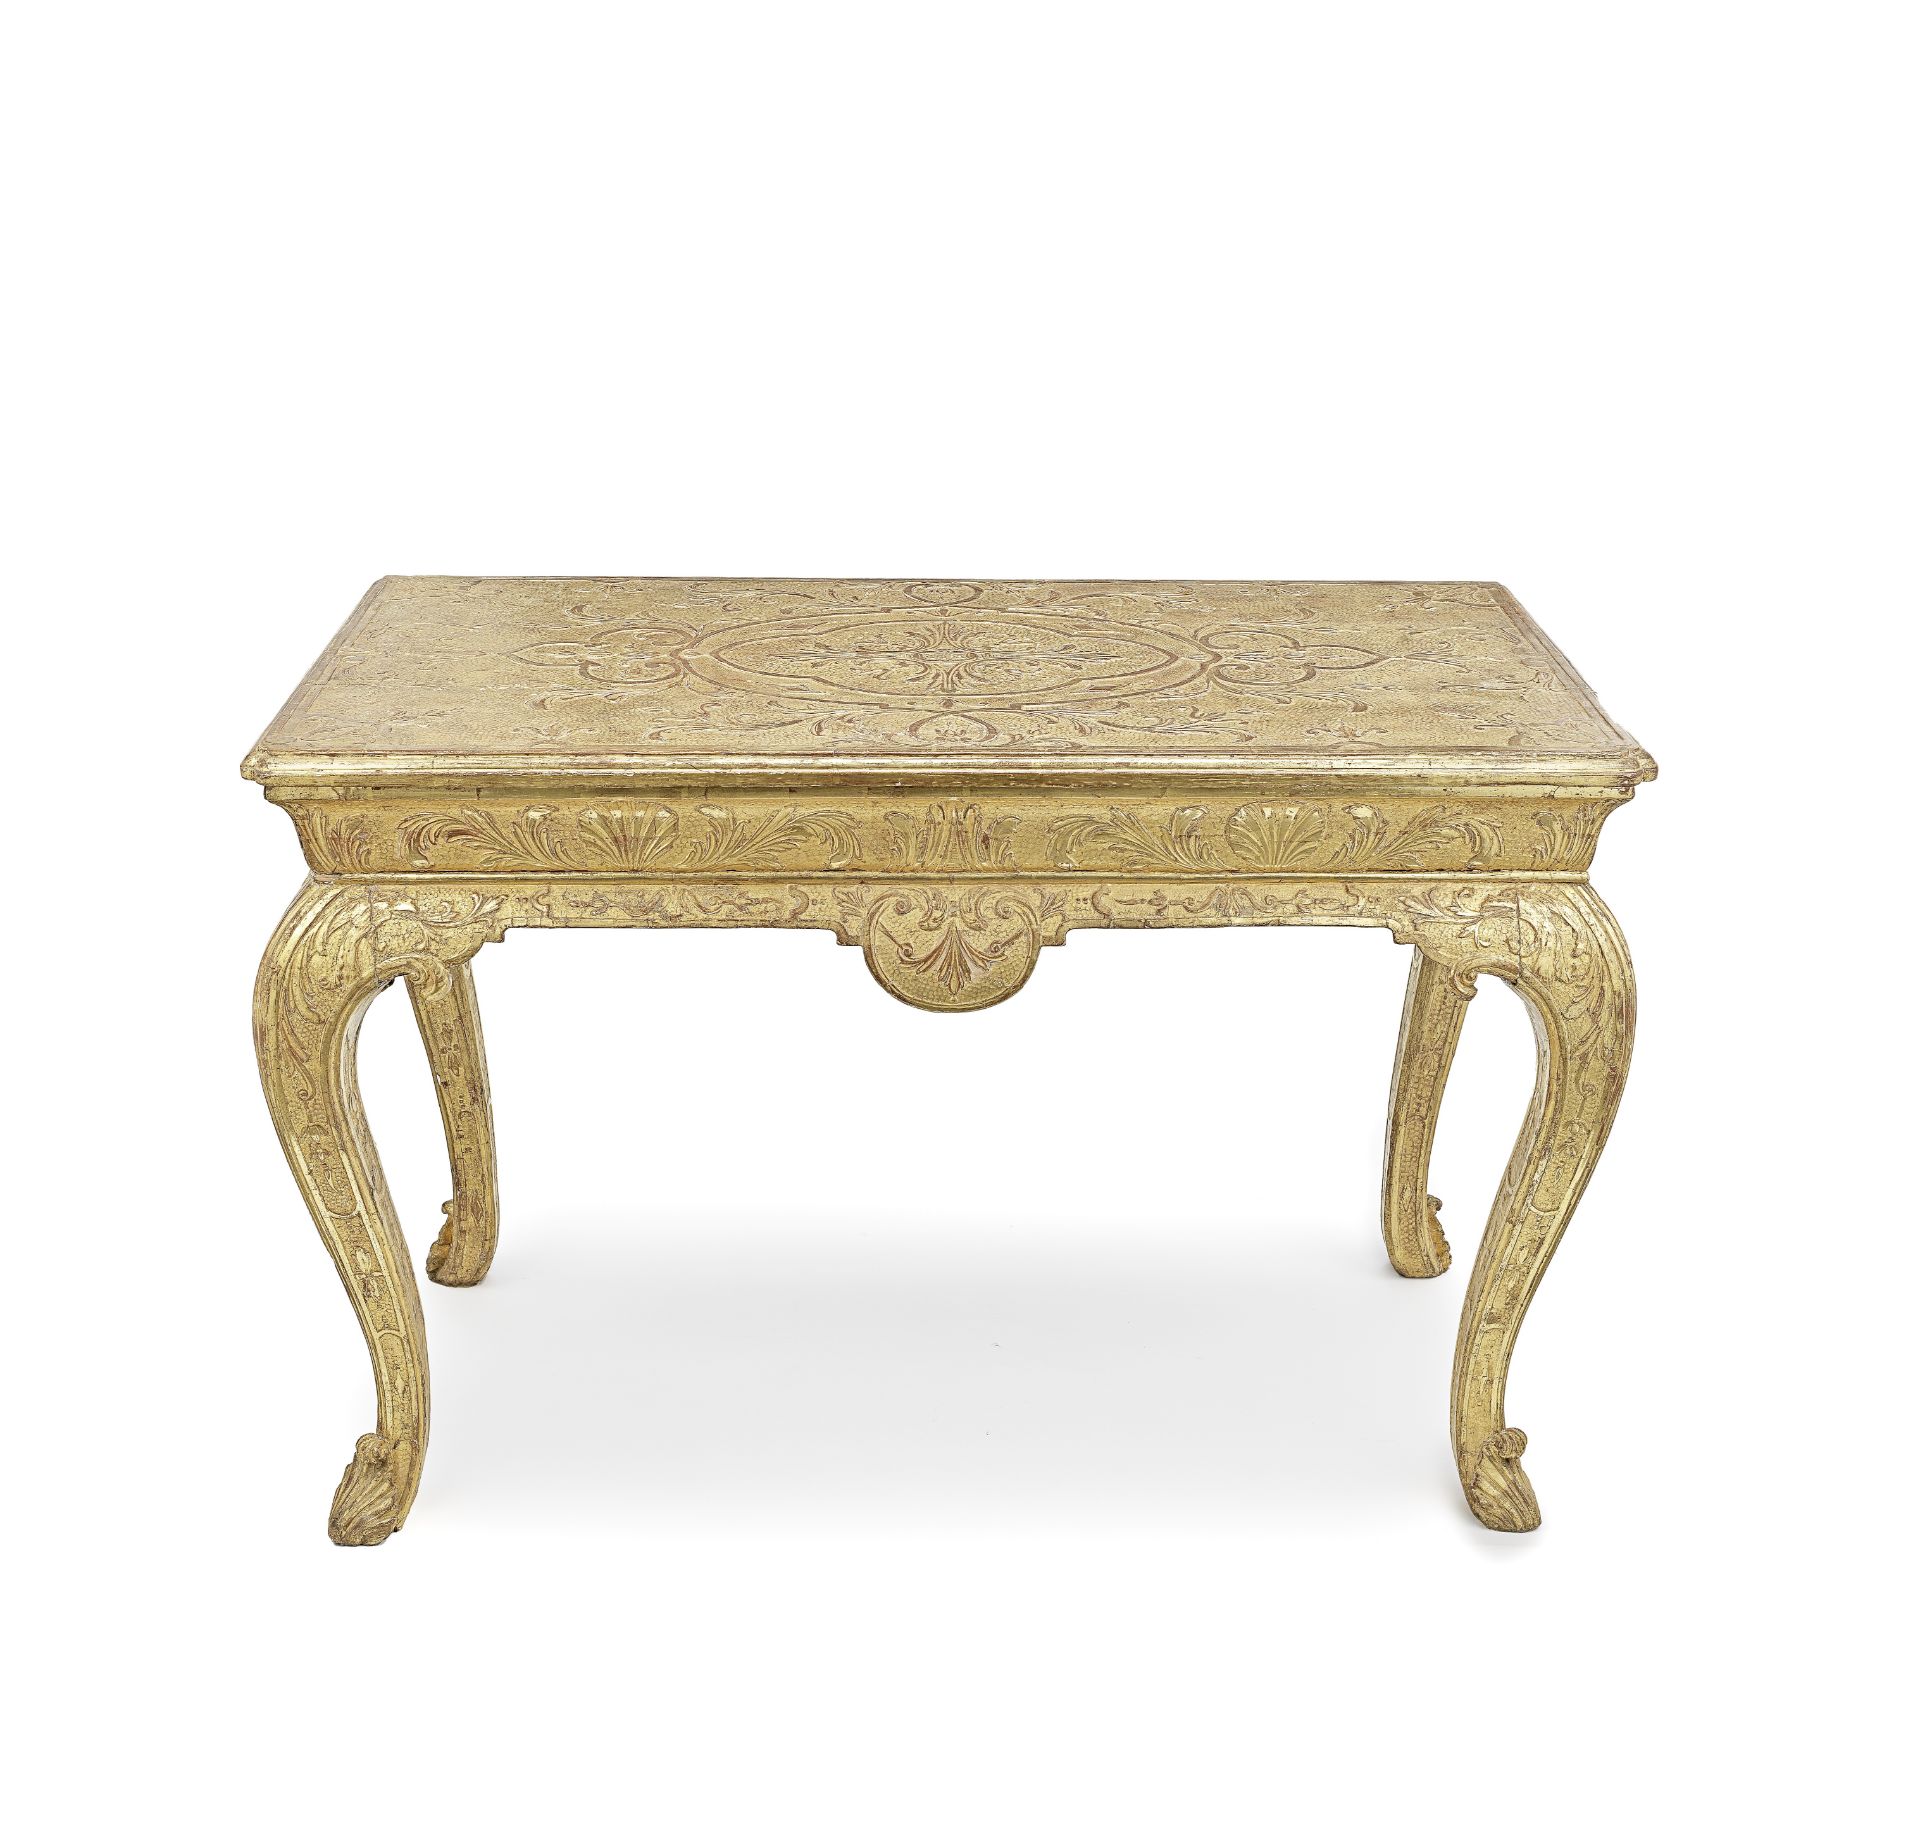 A George I gilt gesso side table 1720-1726, possibly by John Belchier